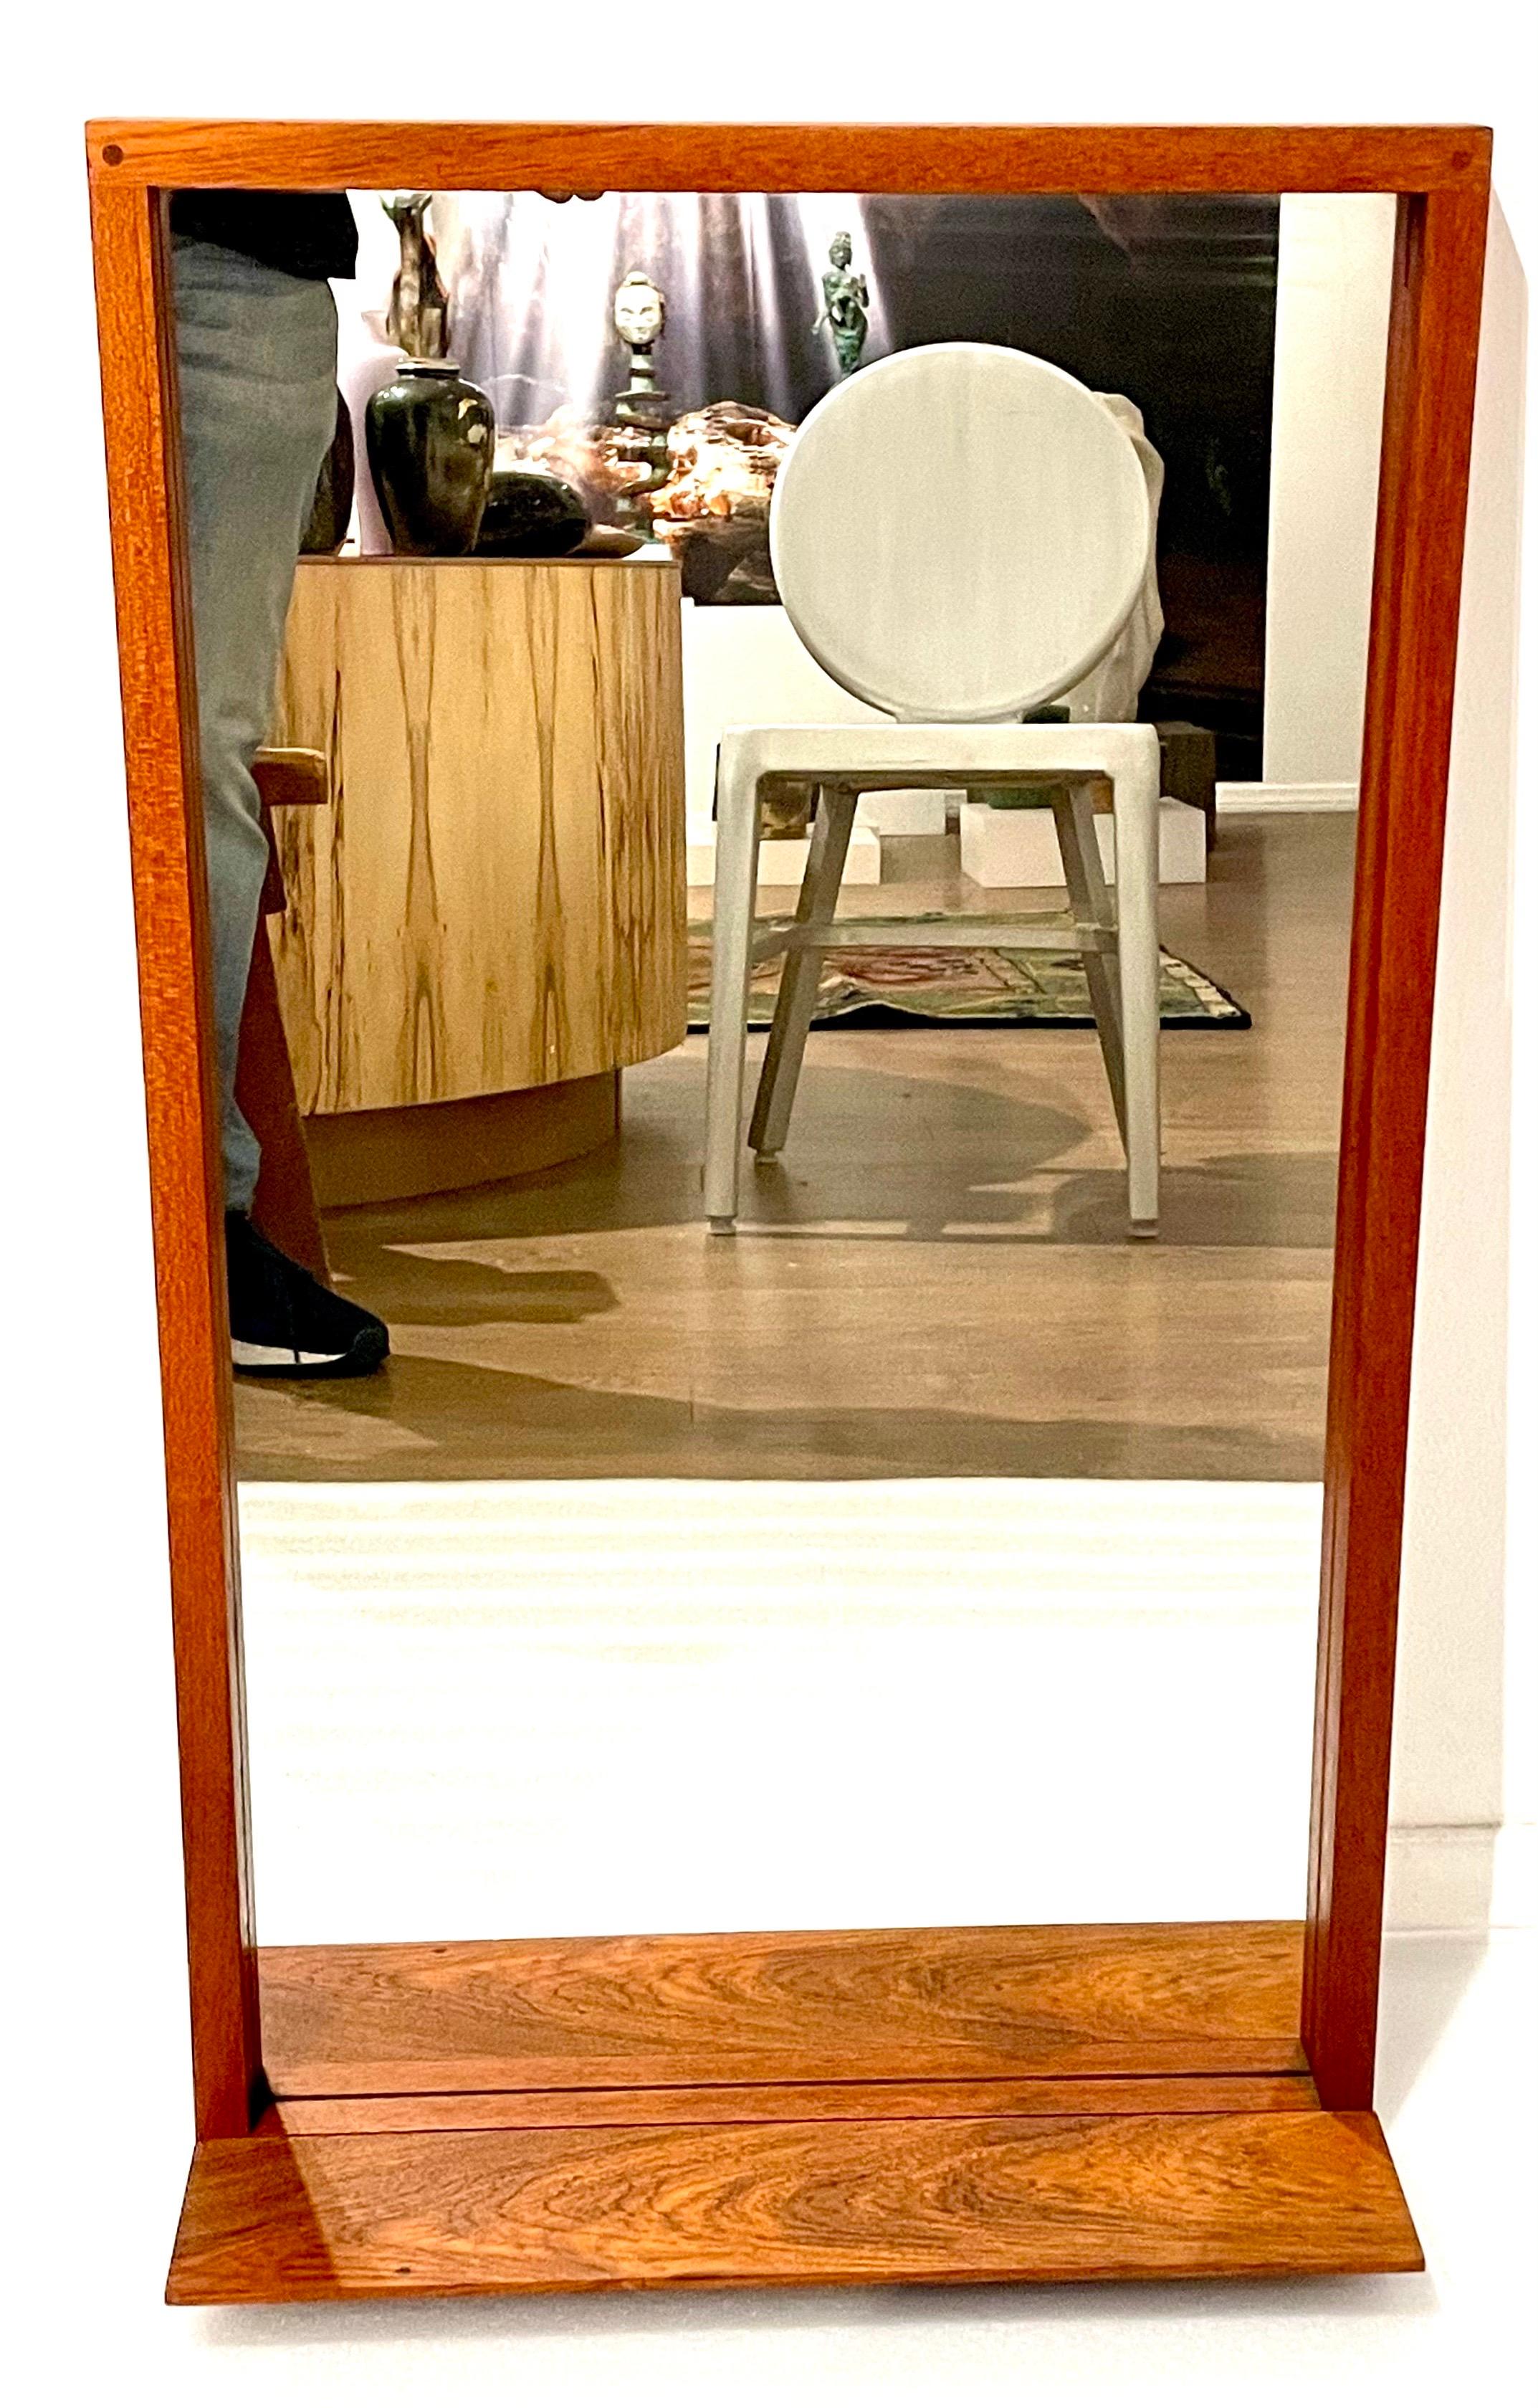 A beautiful solid teak dovetail mirror with a shelf, the bottom shelf, that can be removed. beautiful craftsmanship light and easy to hang.